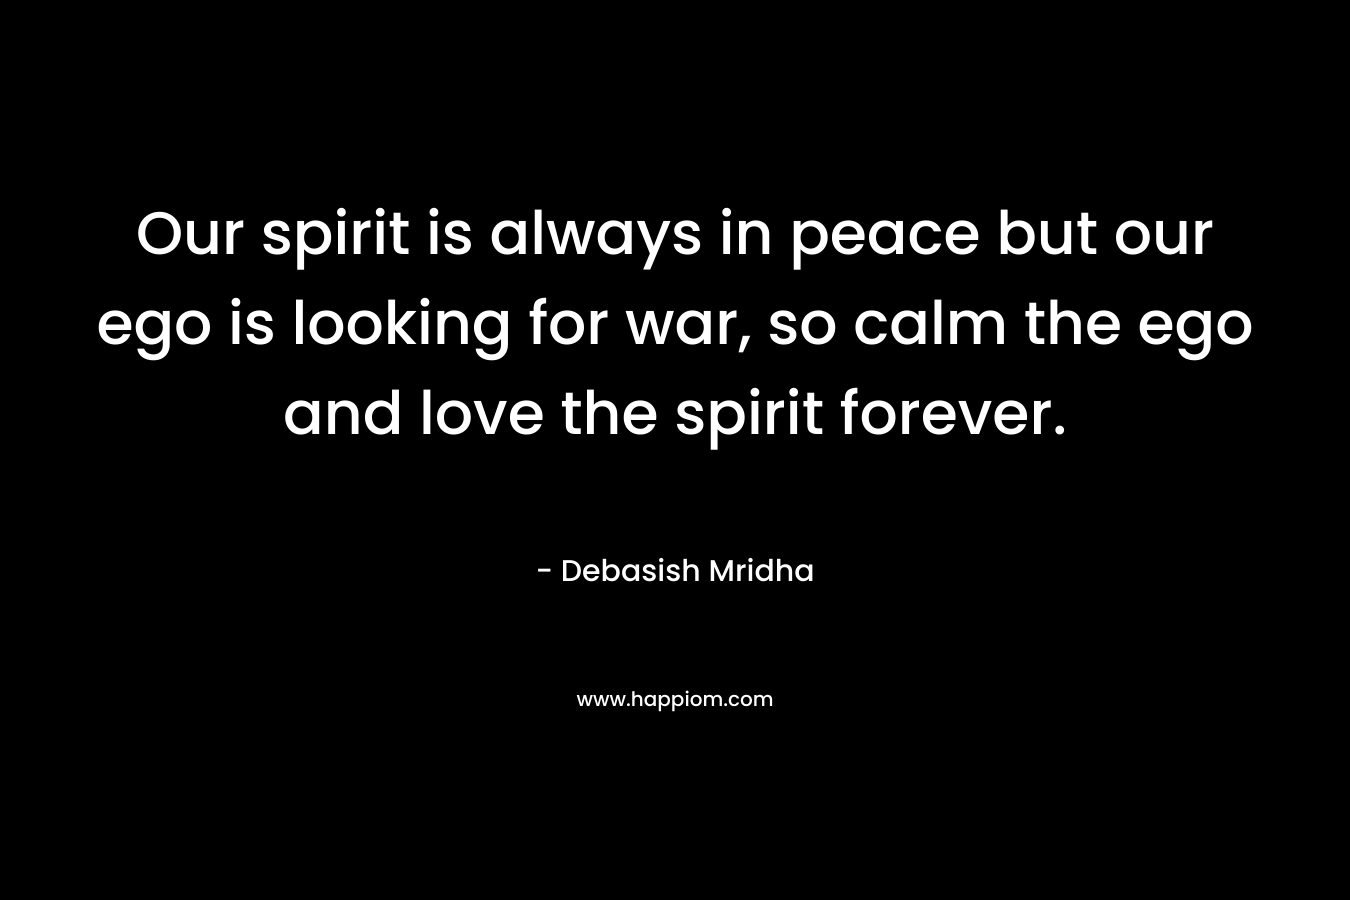 Our spirit is always in peace but our ego is looking for war, so calm the ego and love the spirit forever.